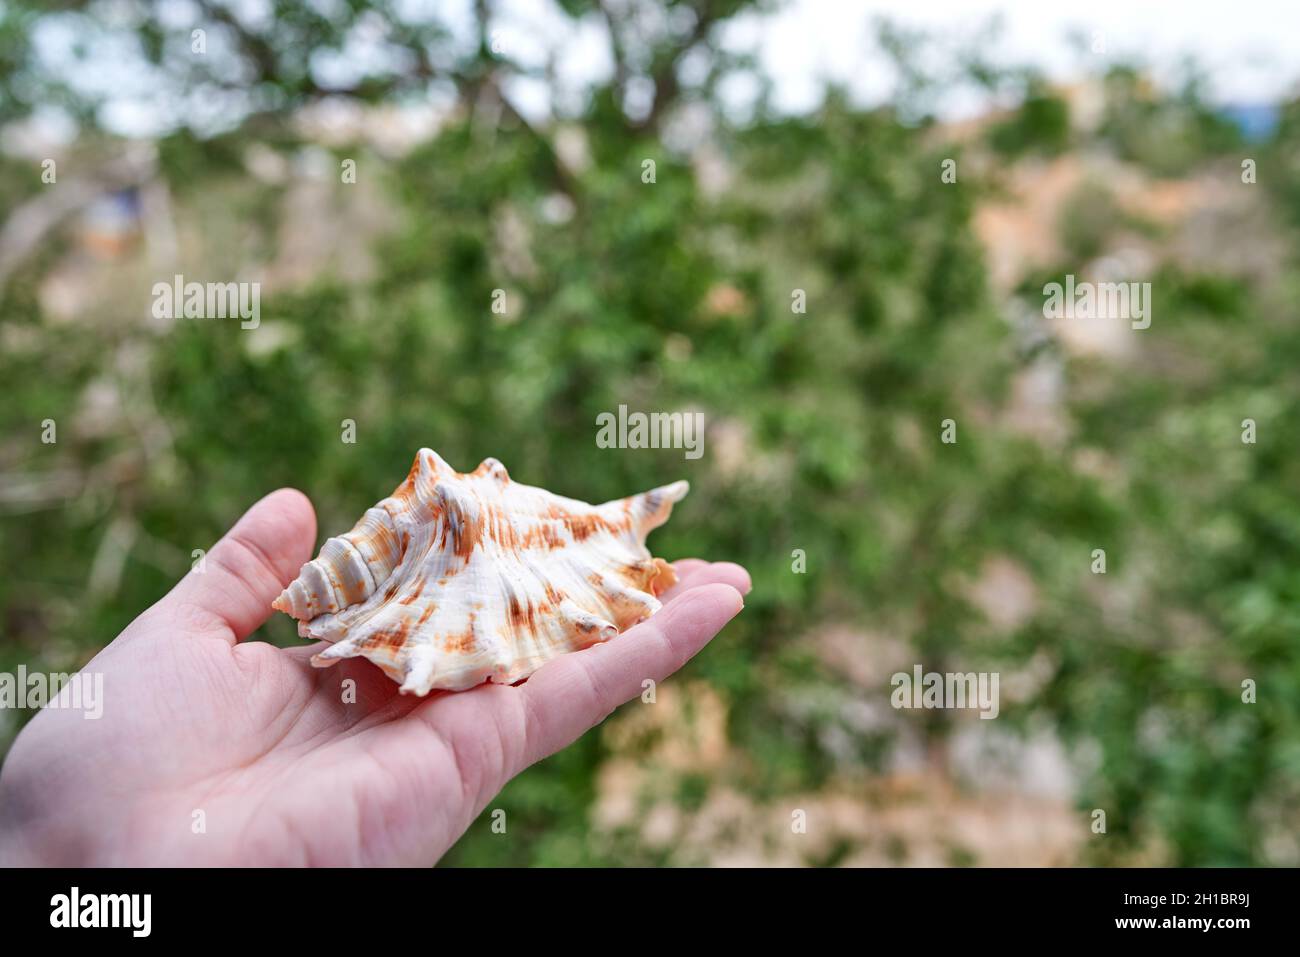 Lambis truncata (giant spider conch), sea snail, a marine gastropod mollusk. A seashell lies on a hand against a background of green trees Stock Photo